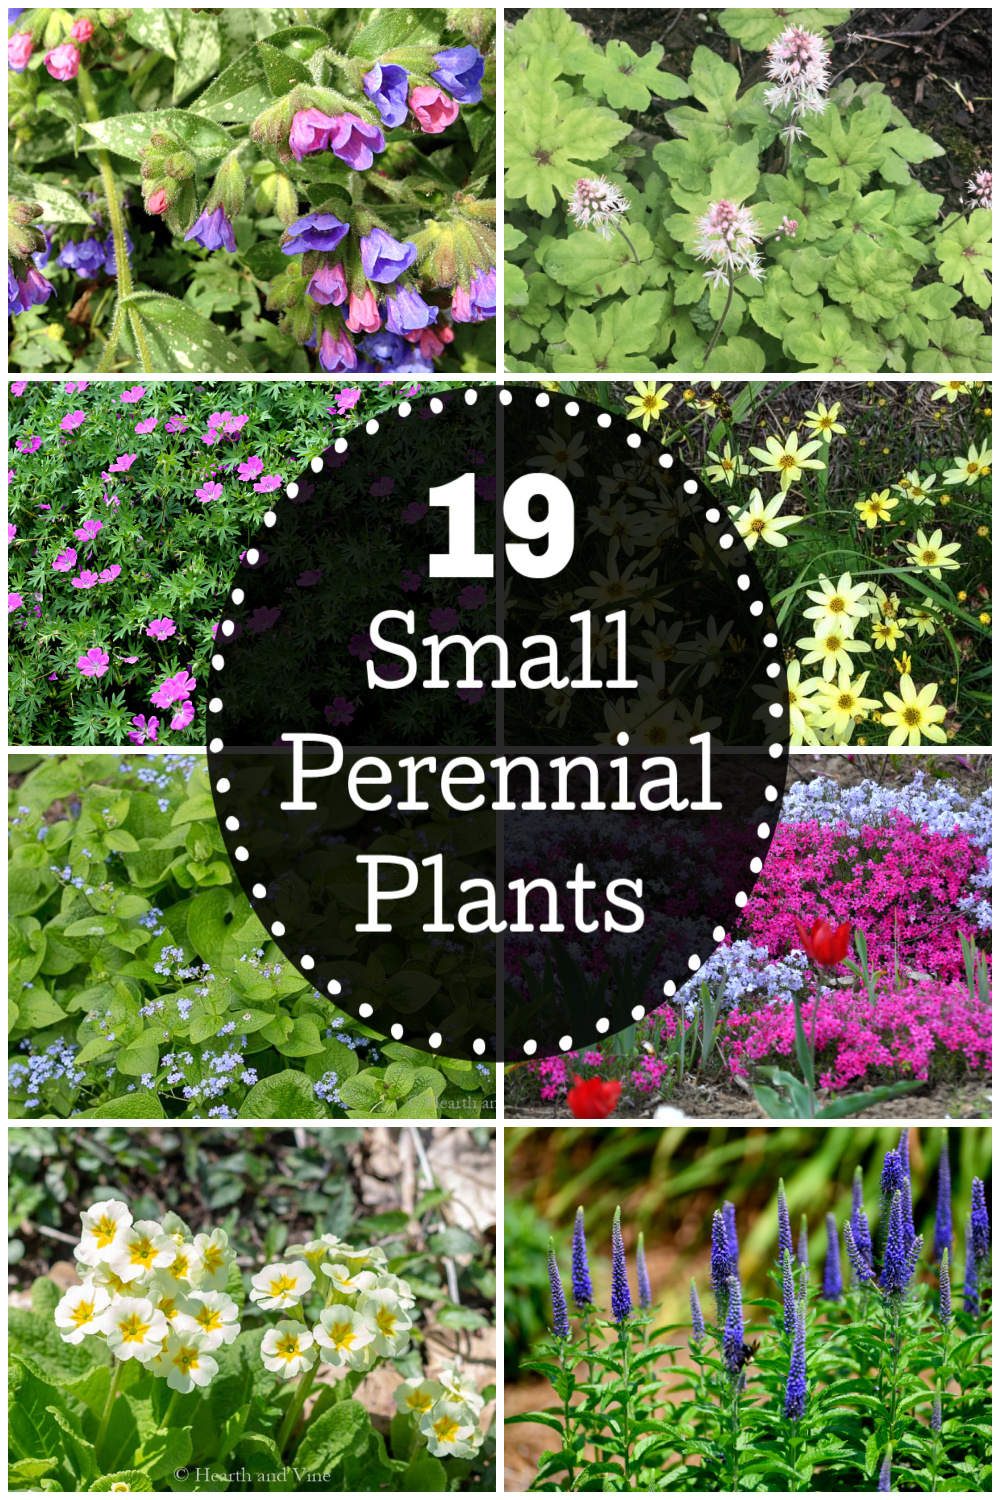 Collage of small perennial plants including geranium, phlox, coreopsis, brunnera, foam flower and lungwort.